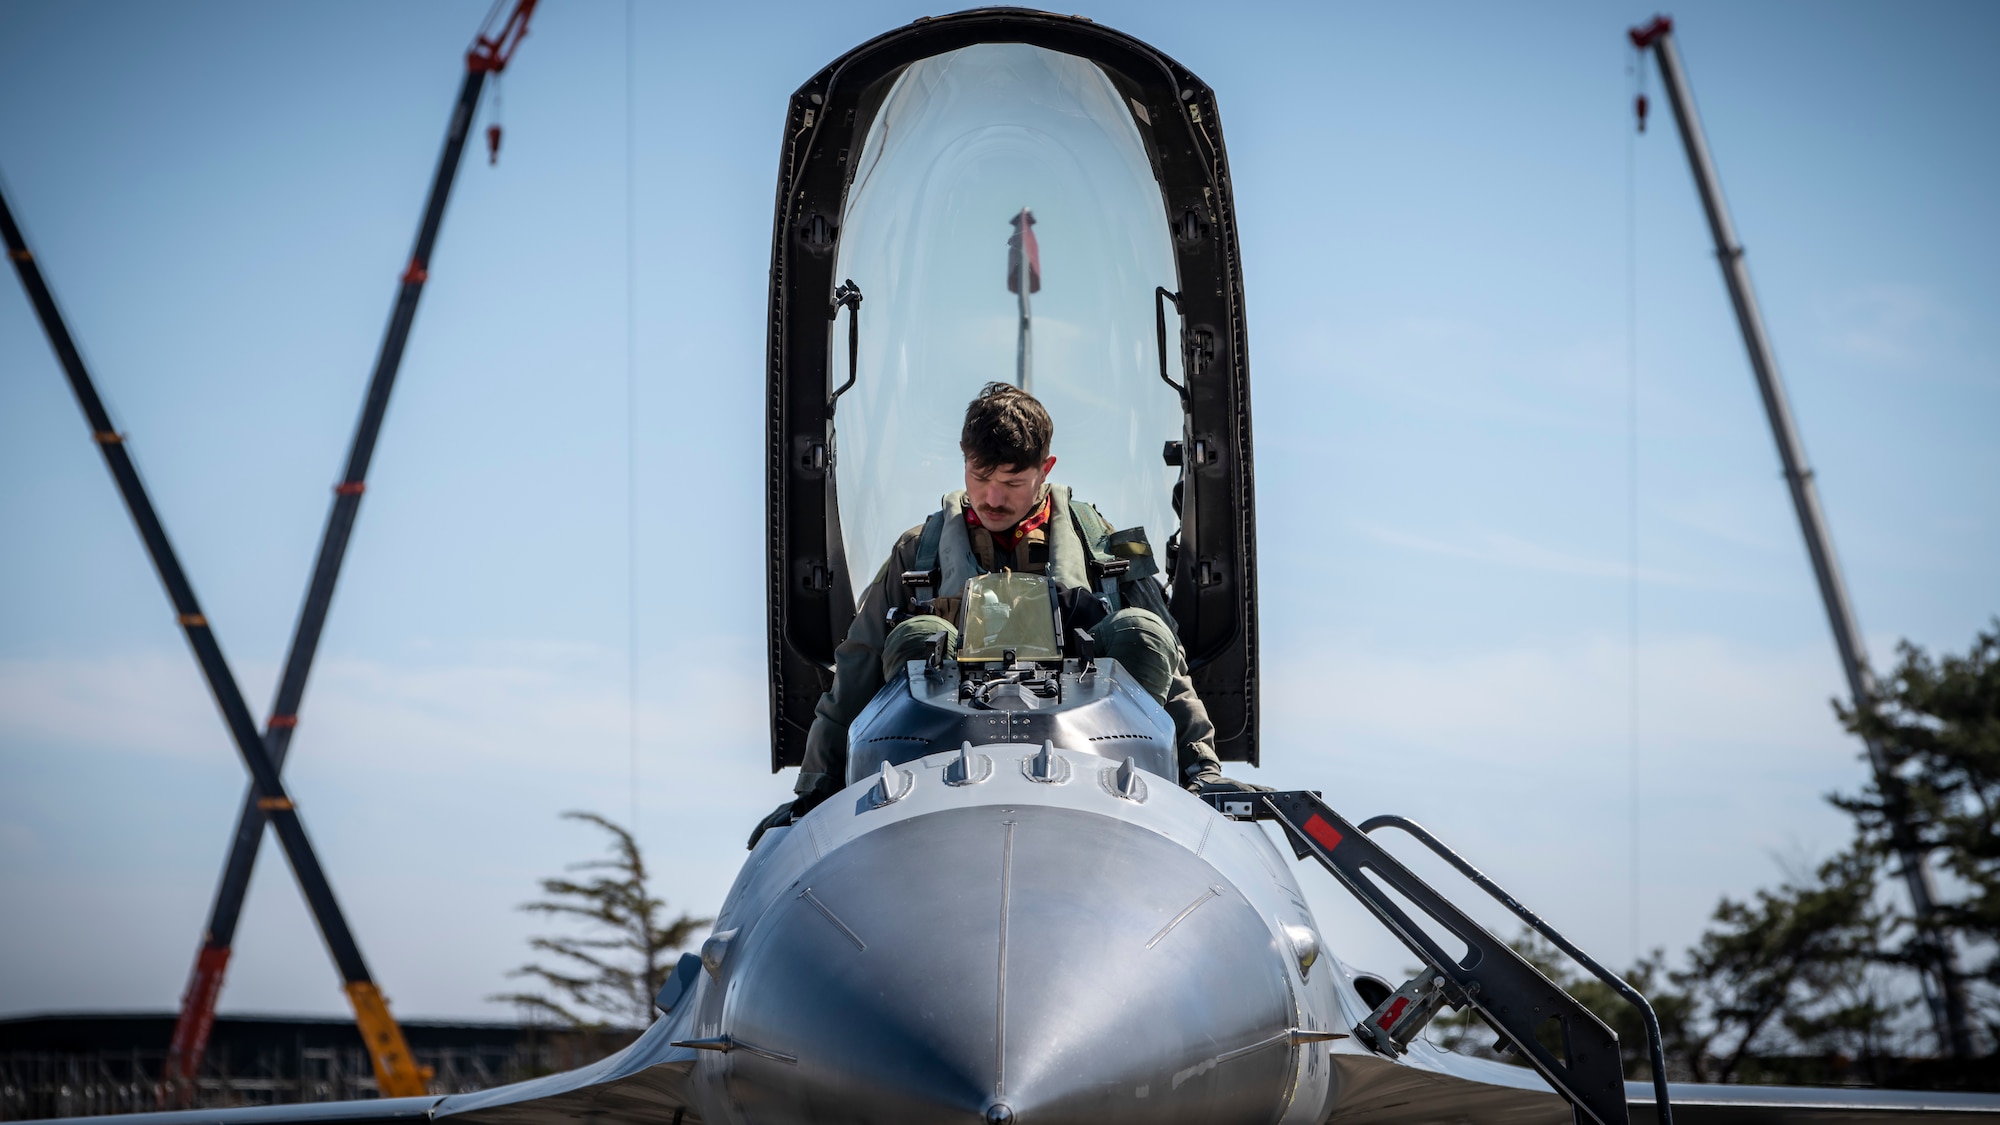 U.S. Air Force Capt. Taylor Dickins, a 13th Fighter Squadron F-16 Fighting Falcon pilot and squadron flight safety officer, sits in the cockpit of an F-16 at Misawa Air Base, Japan, March 30, 2020. Established as the 313th Bombardment Squadron during World War II, the 13th FS pioneered the Wild Weasel mission during the Vietnam War. In 1972, the 13th FS adopted a black Asian leopard named Eldridge and became known as the “Panther Pack.” On June 1, 1985, the squadron activated at Misawa Air Base flying for the 432nd and 35th Operations Groups. (U.S. Air Force photo by Airman 1st Class China M. Shock)